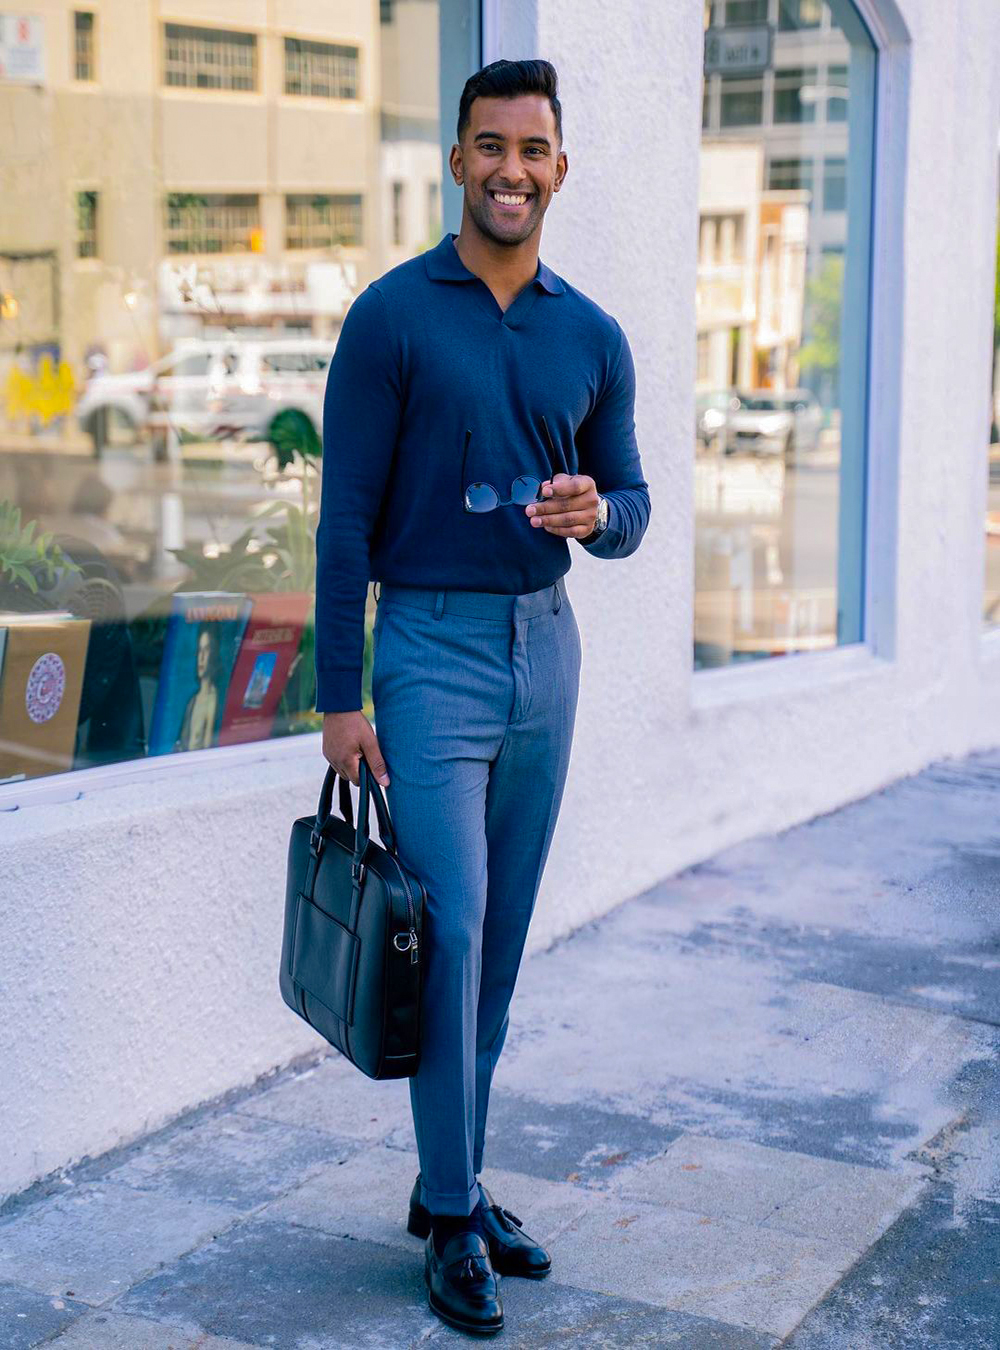 Polo neck sweater, dress pants, tassel loafers outfit